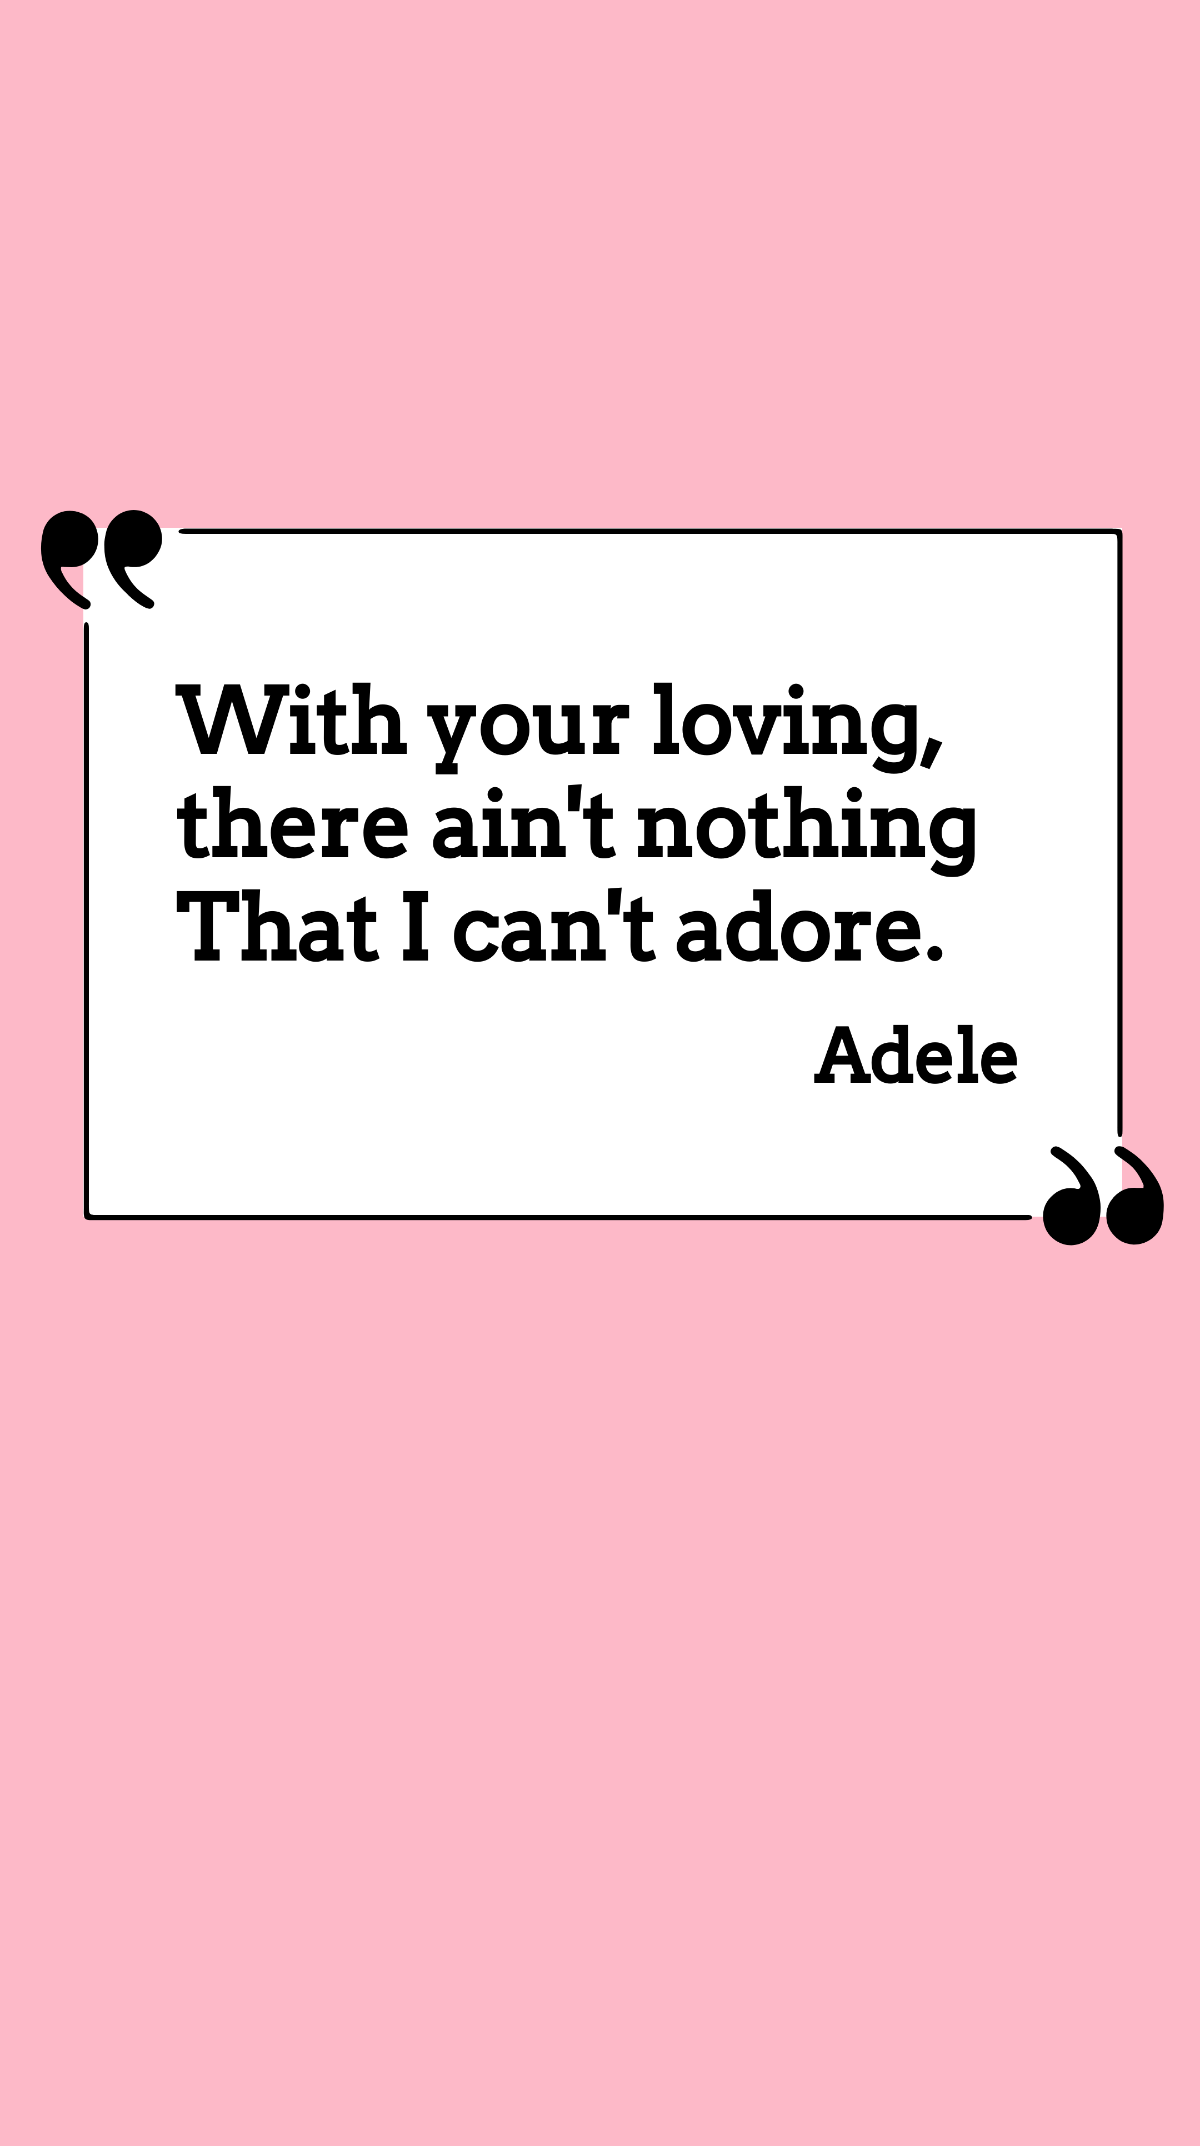 Adele - With your loving, there ain't nothing that I can't adore.